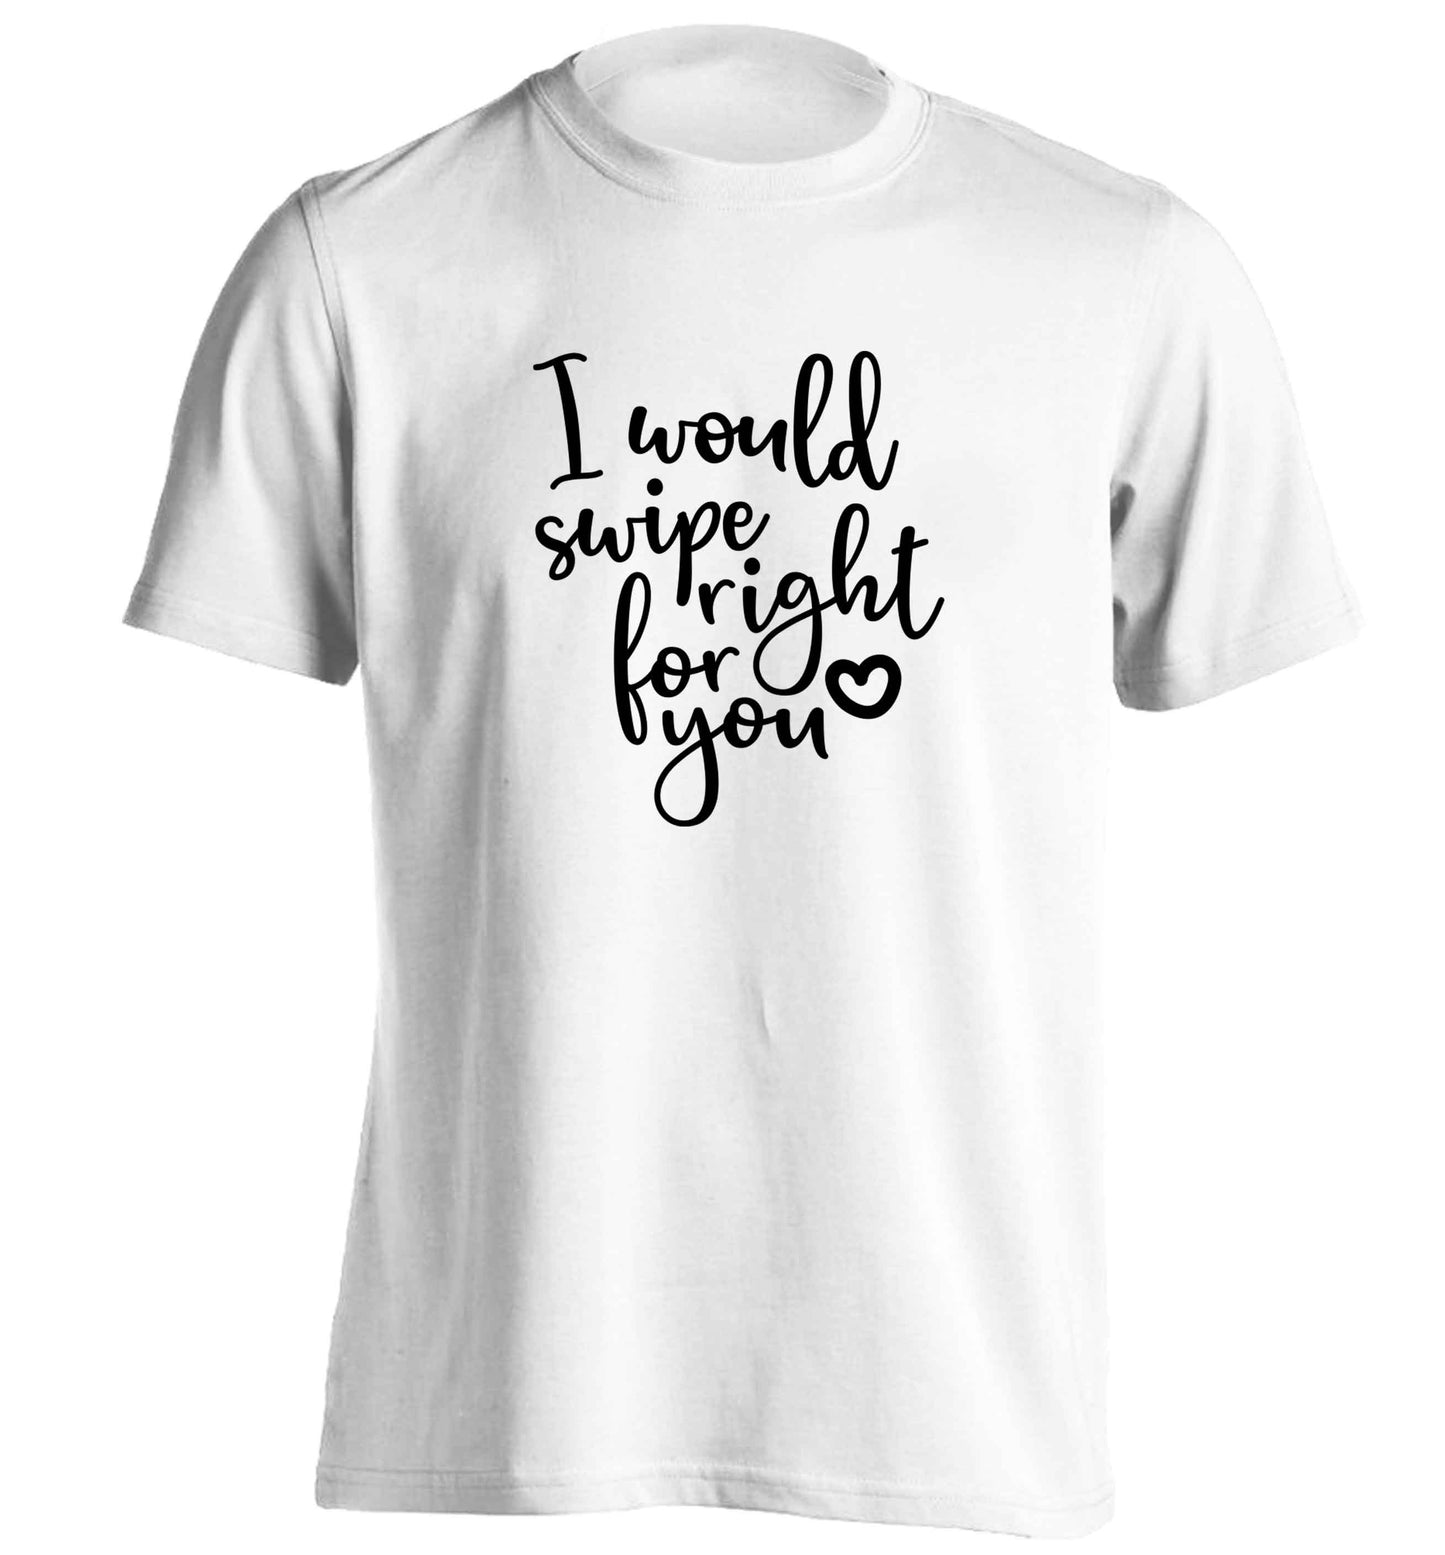 I would swipe right for you adults unisex white Tshirt 2XL